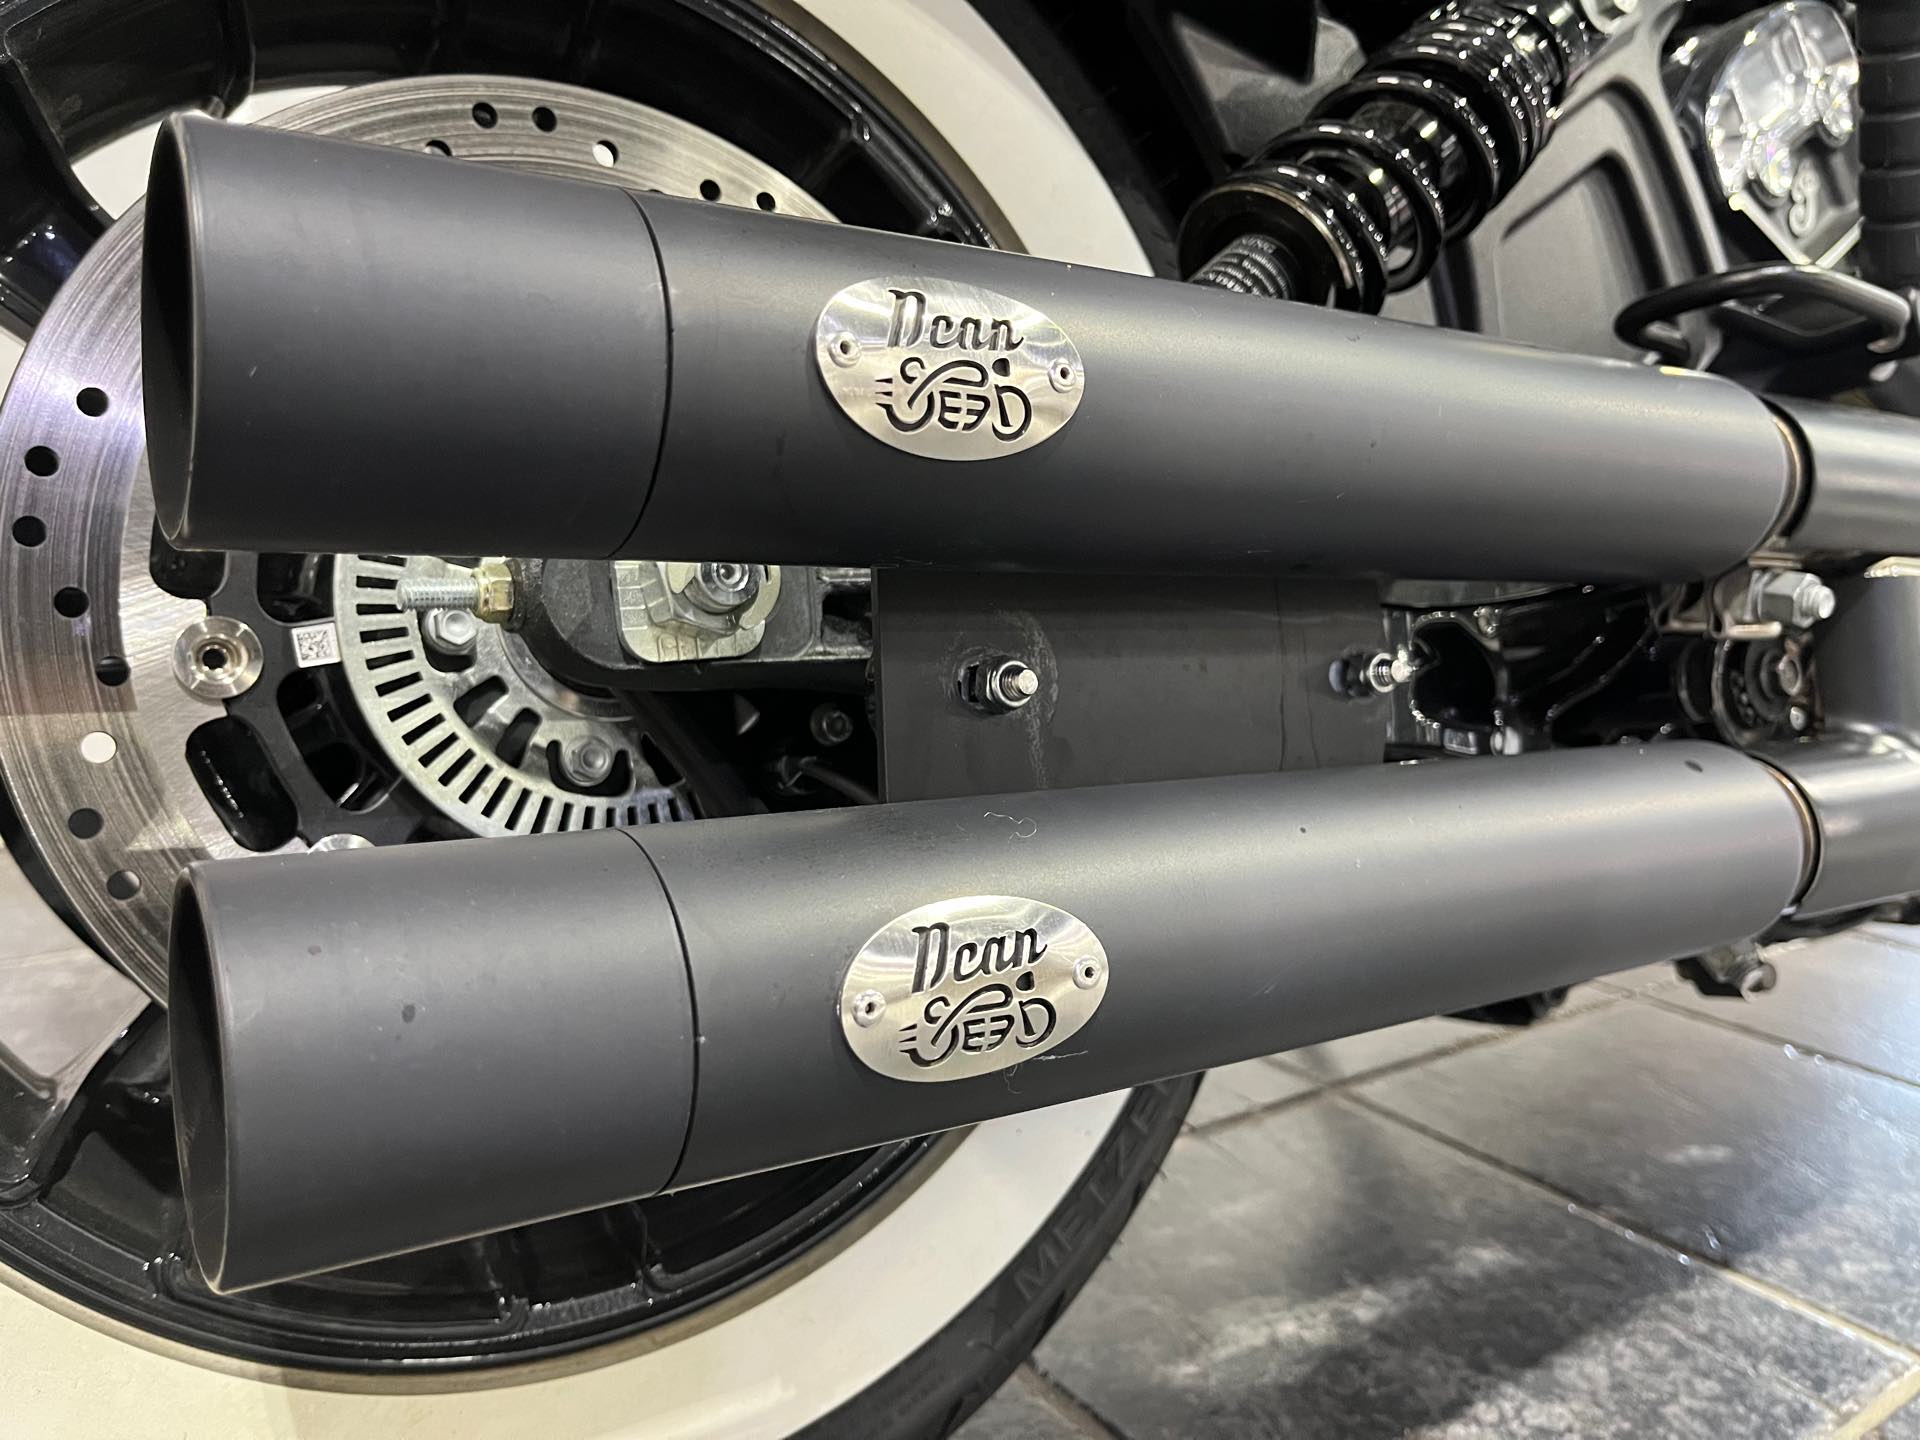 2020 Indian Scout Bobber - ABS at Cycle Max